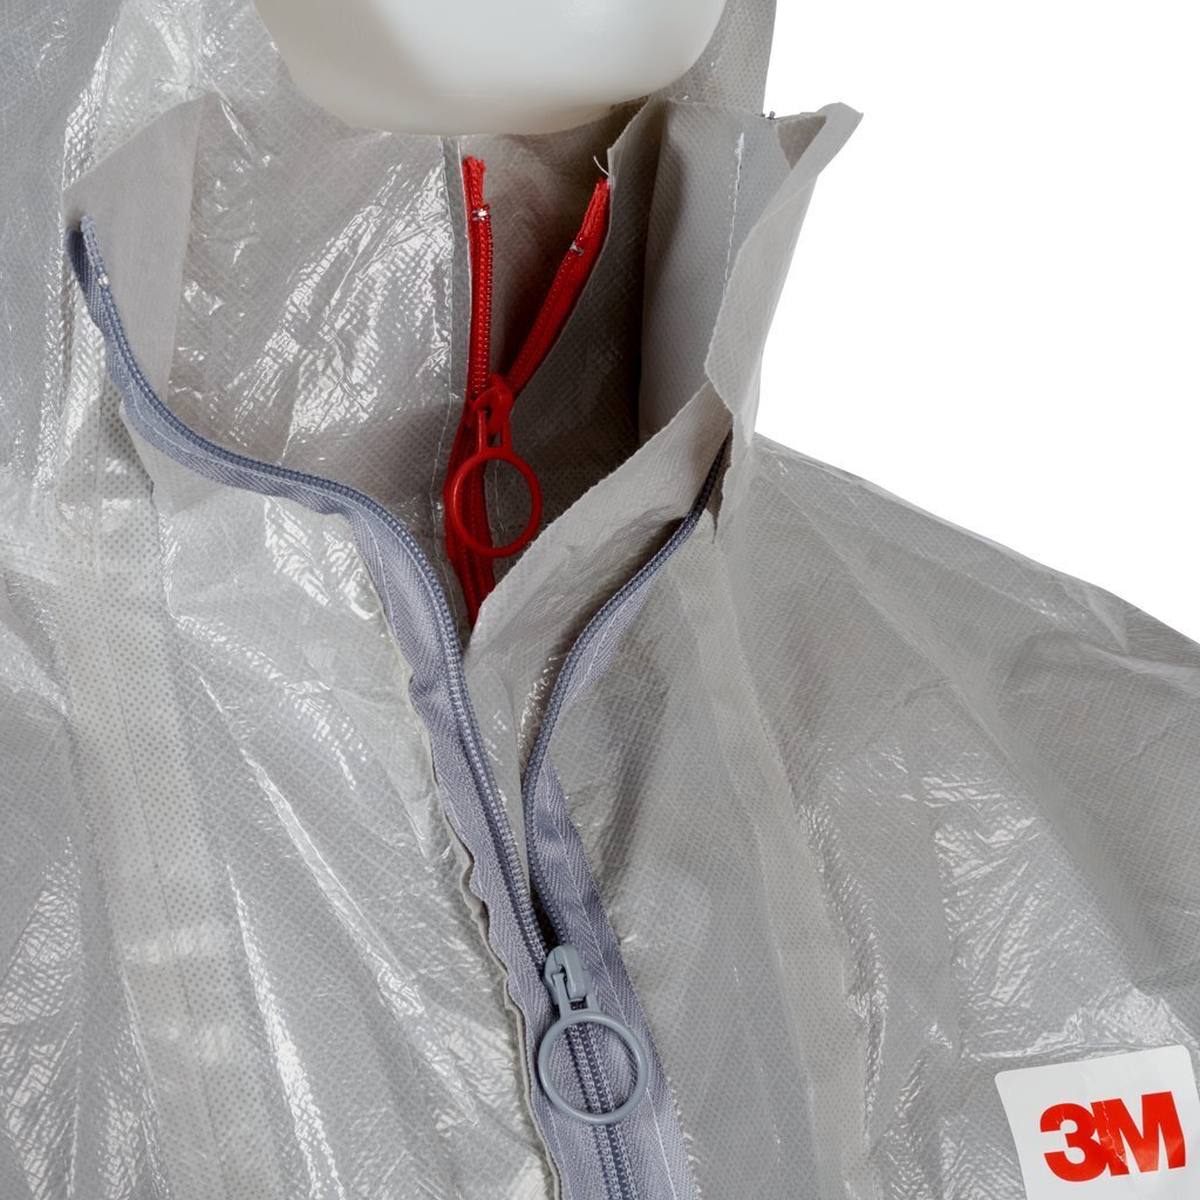 3M 4570 Protective suit, grey, type 3/4/5/6, size L, extremely robust, sealed seams, double zip, light and supple material, size L